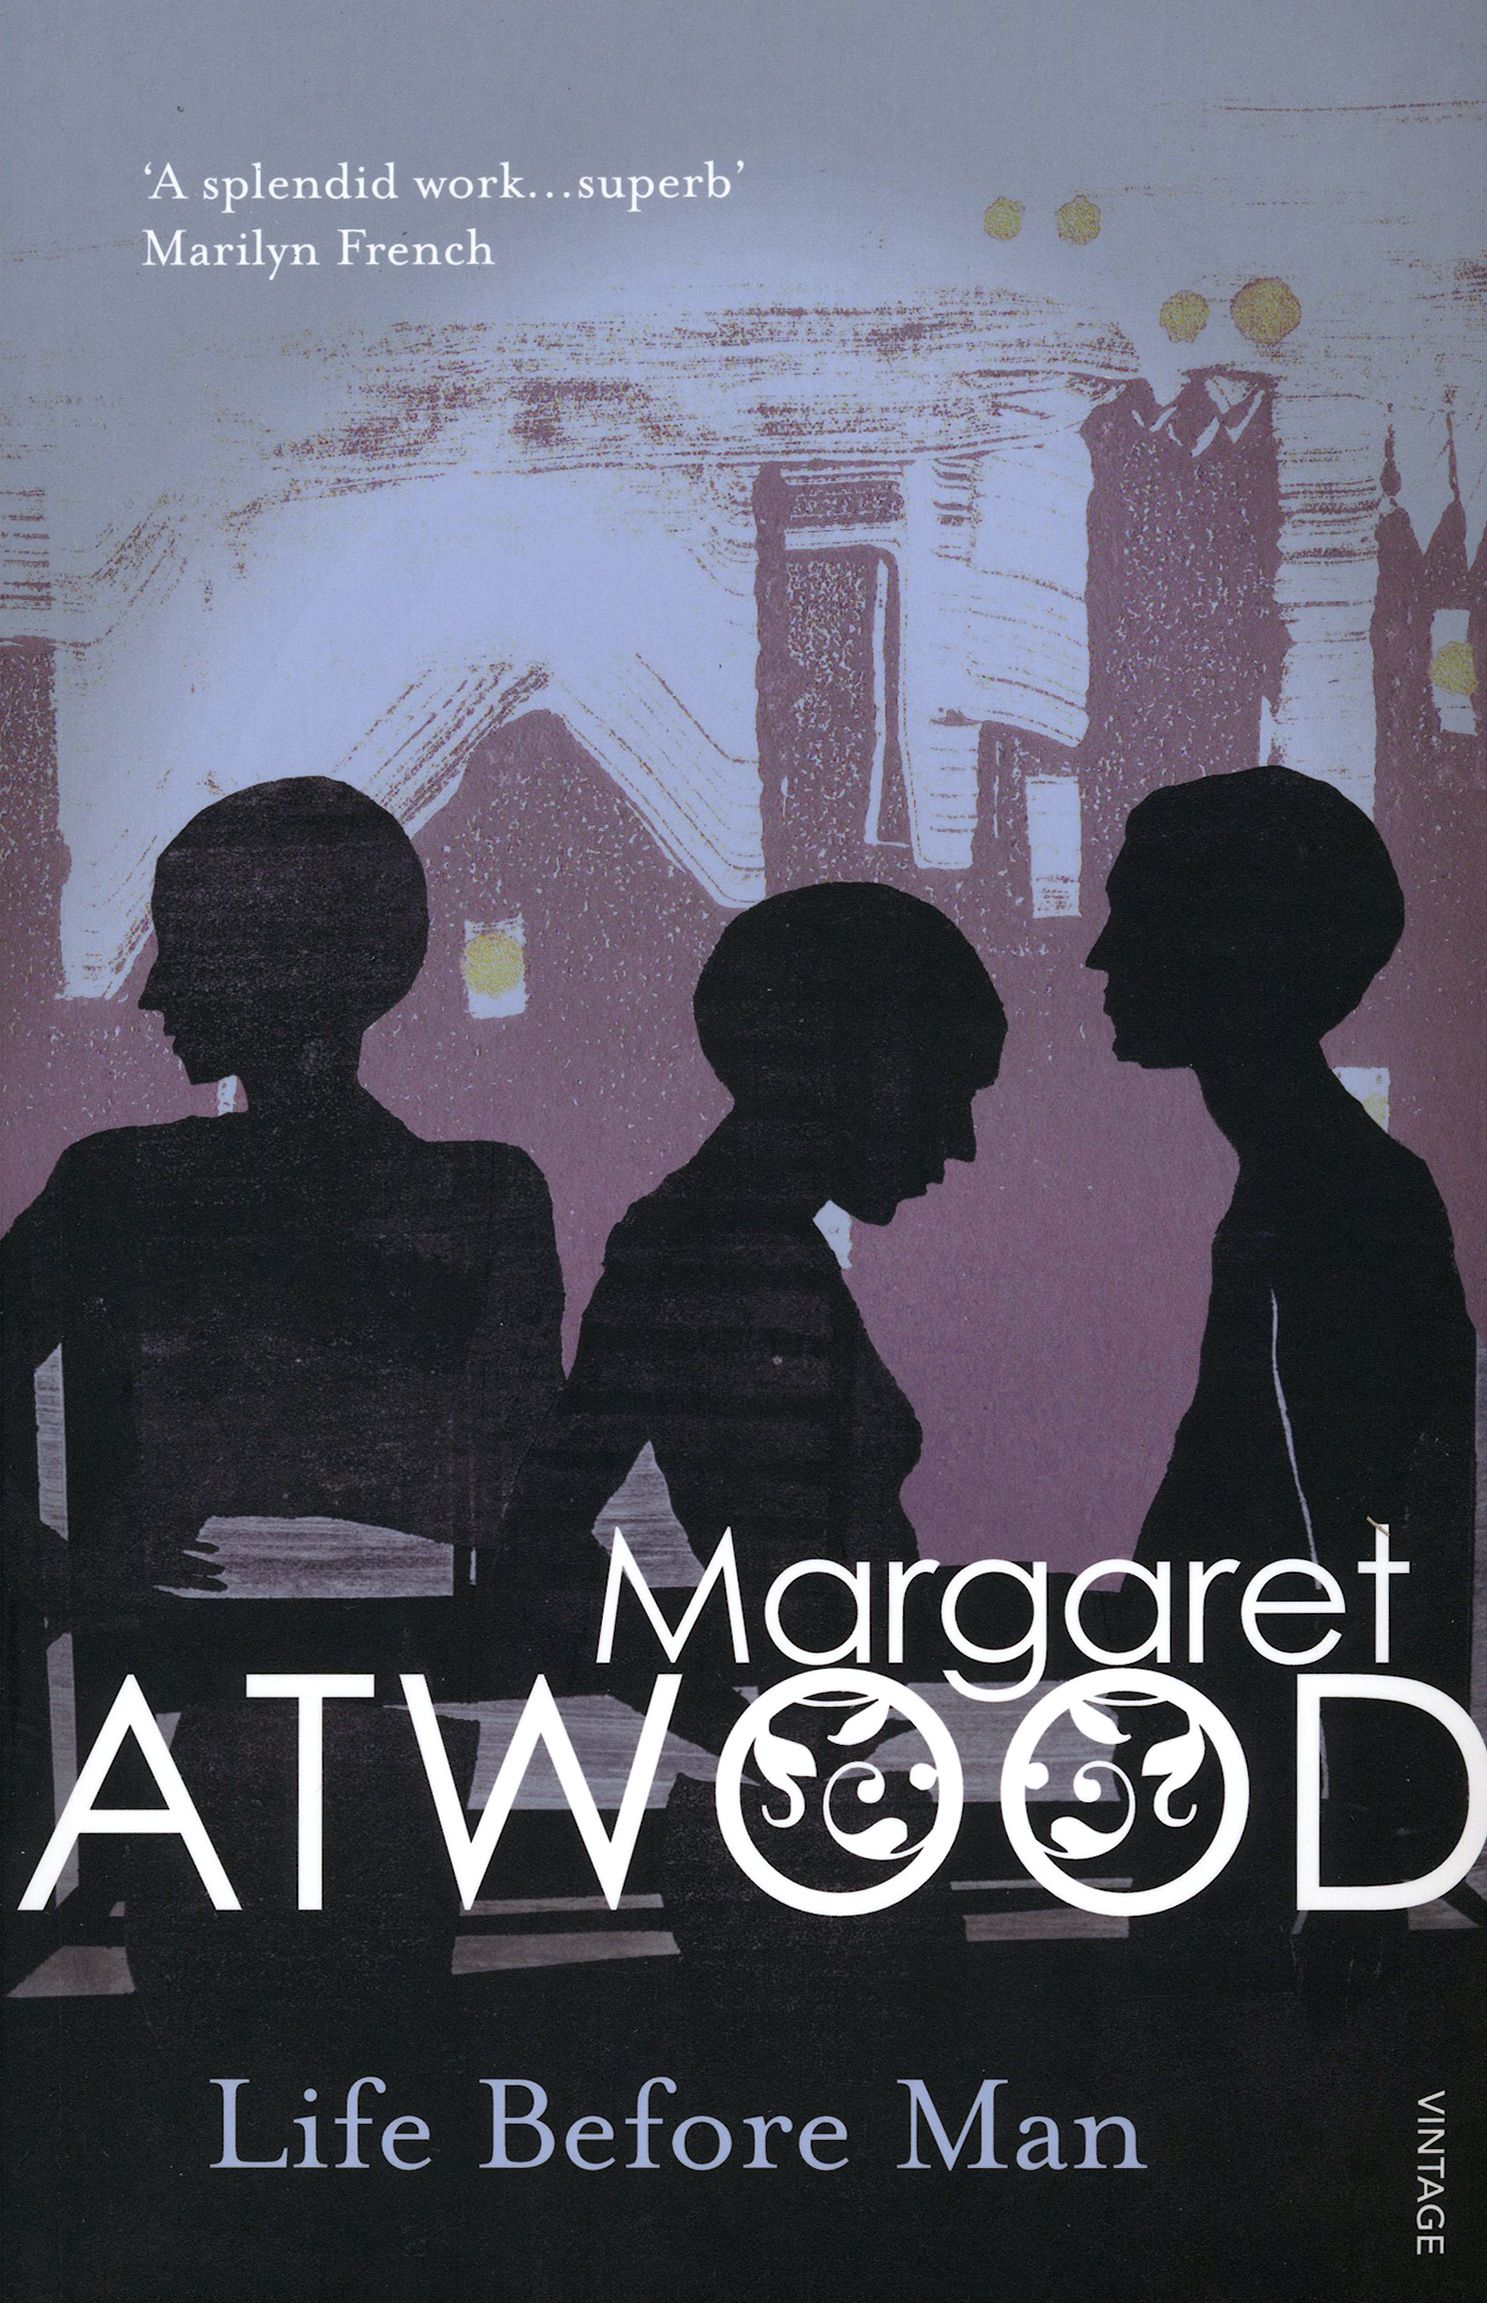 Before we life. Margaret Atwood Life before man. Life before man. Atwood Margaret "bodily harm".